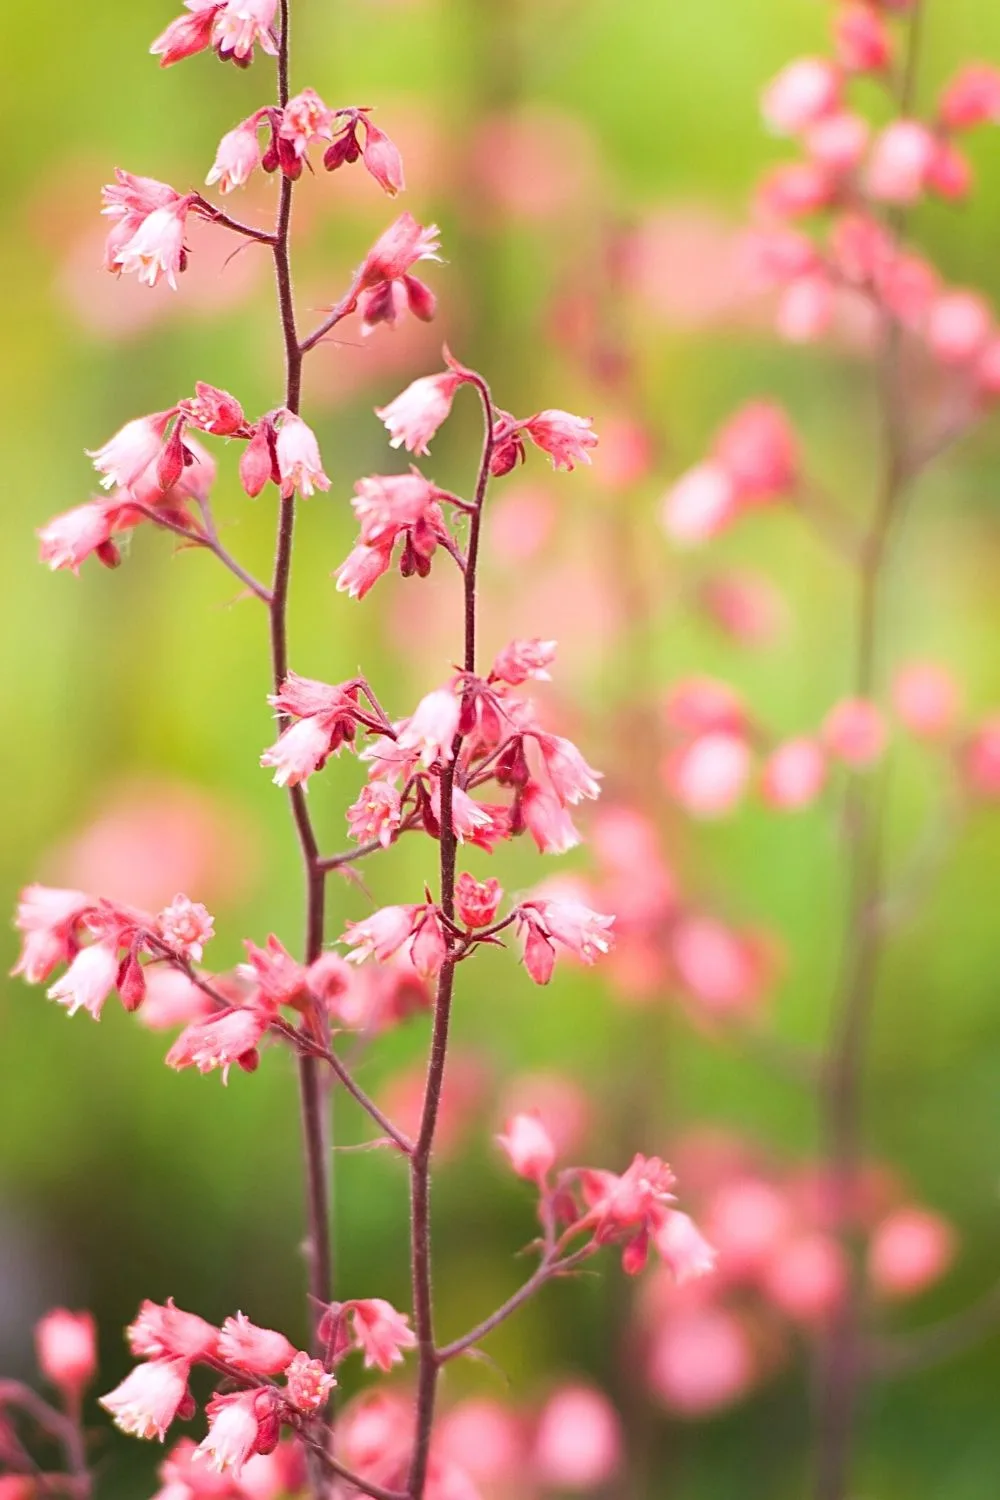 The pink flowers of the Heuchera offer a touch of color to the north-facing side of the house